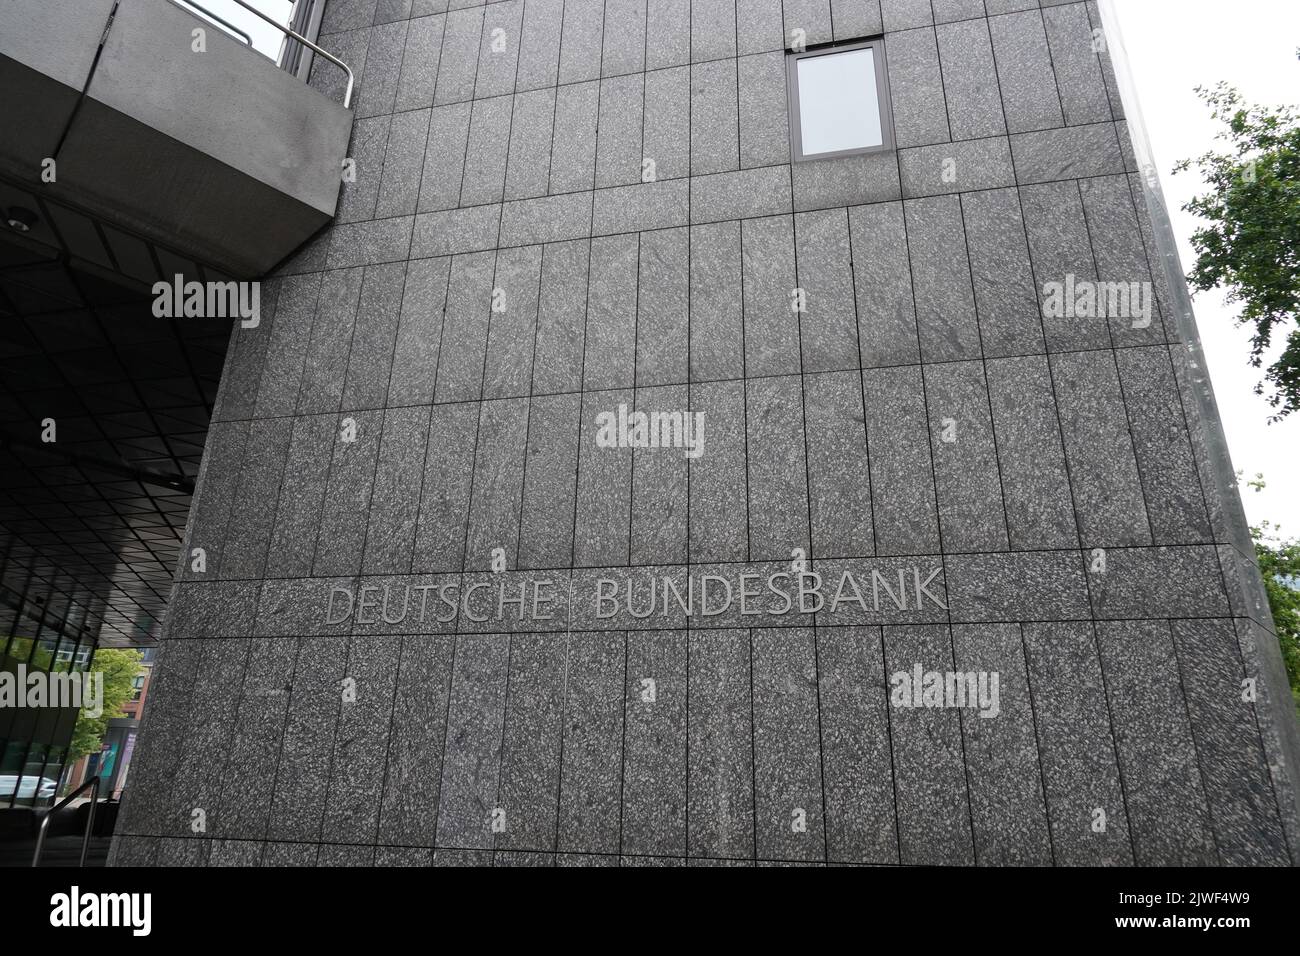 German Federal Bank building with the name written in German. Stock Photo